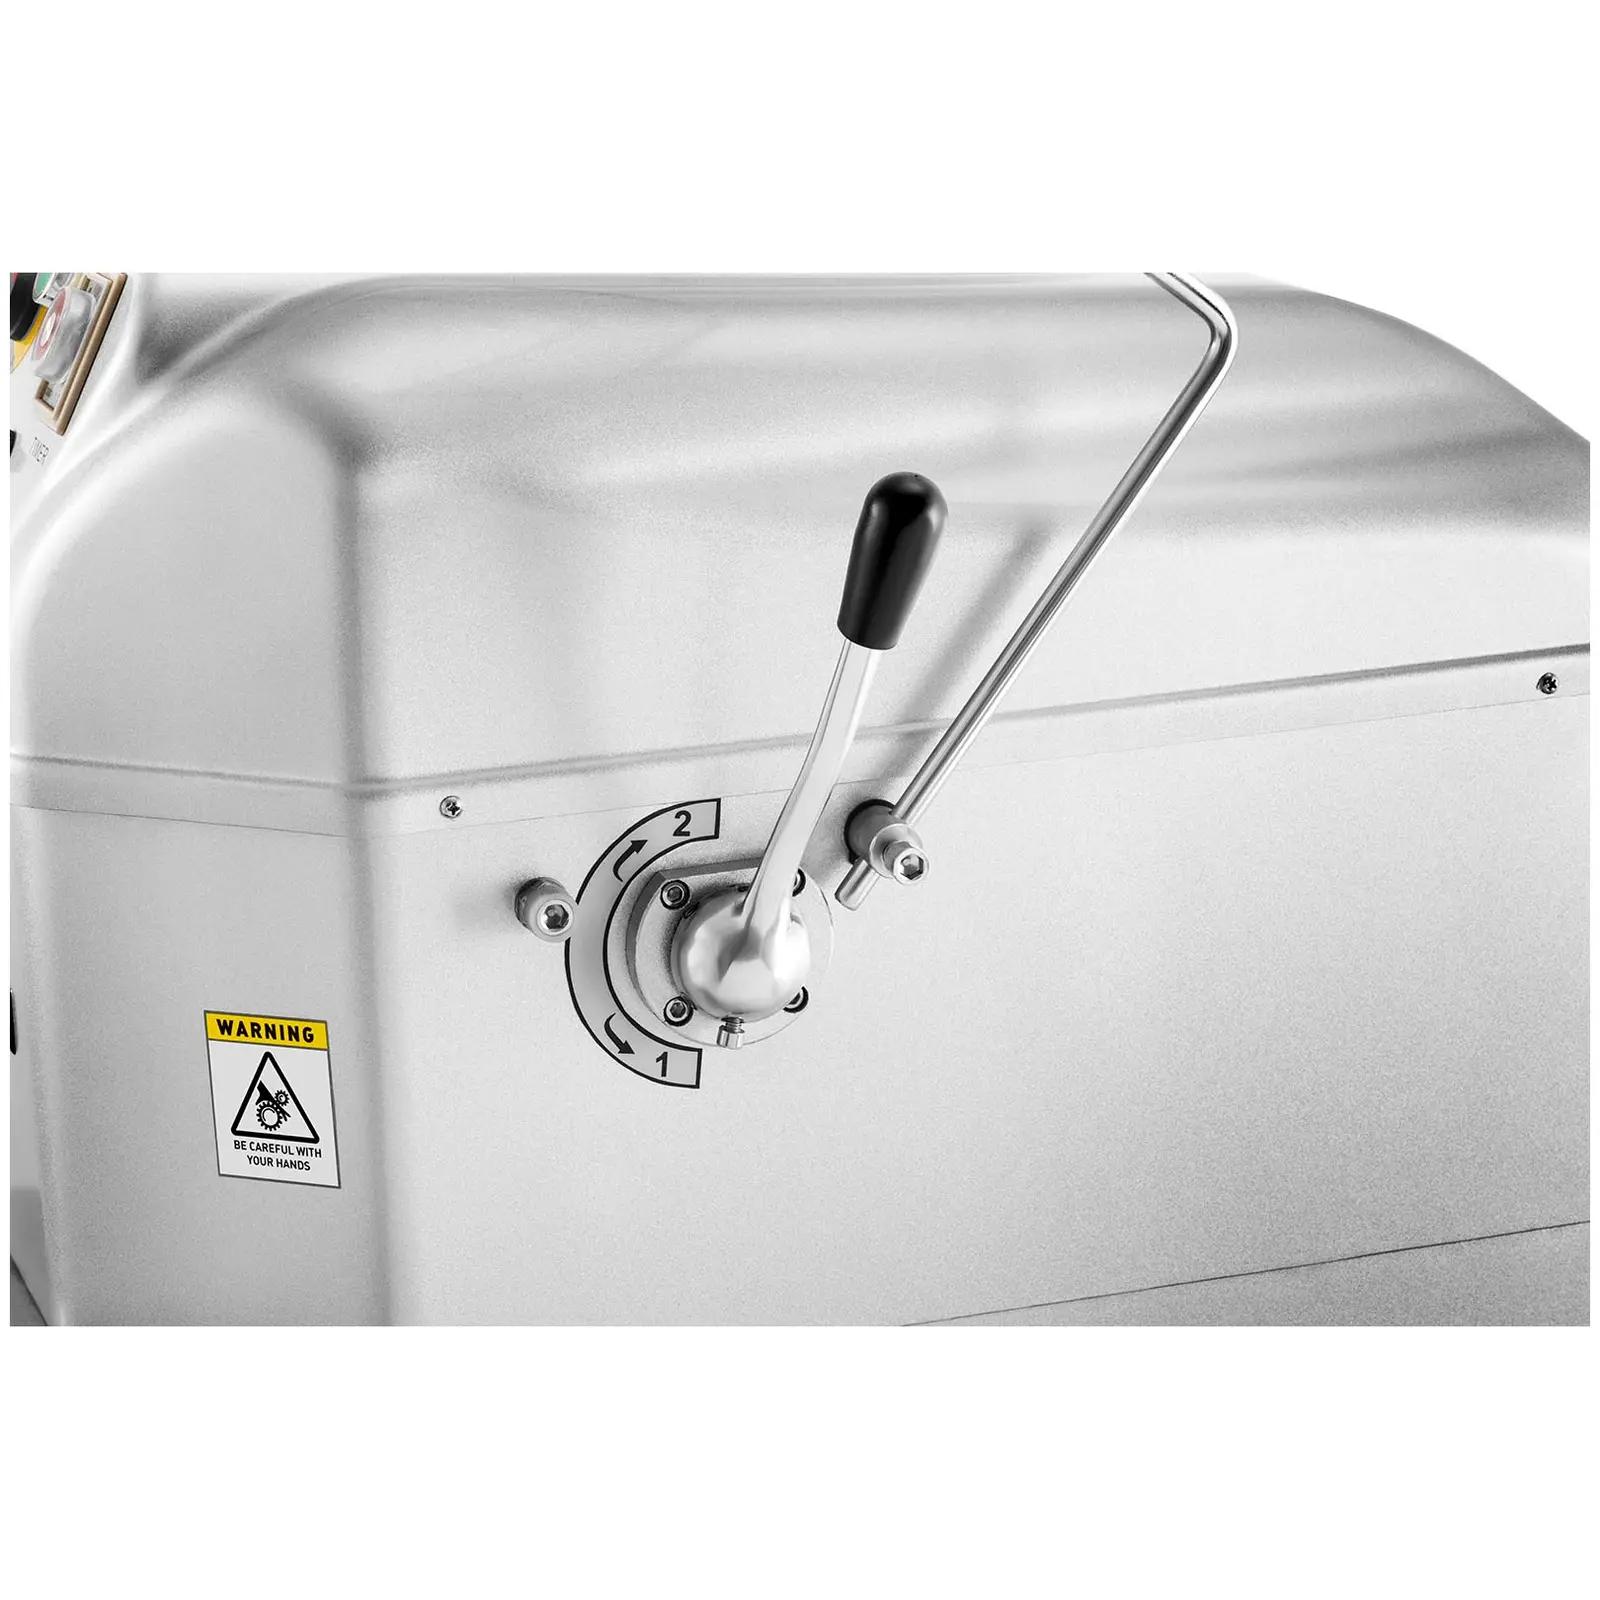 B-Ware Knetmaschine - 30 L - Royal Catering - 2100 W